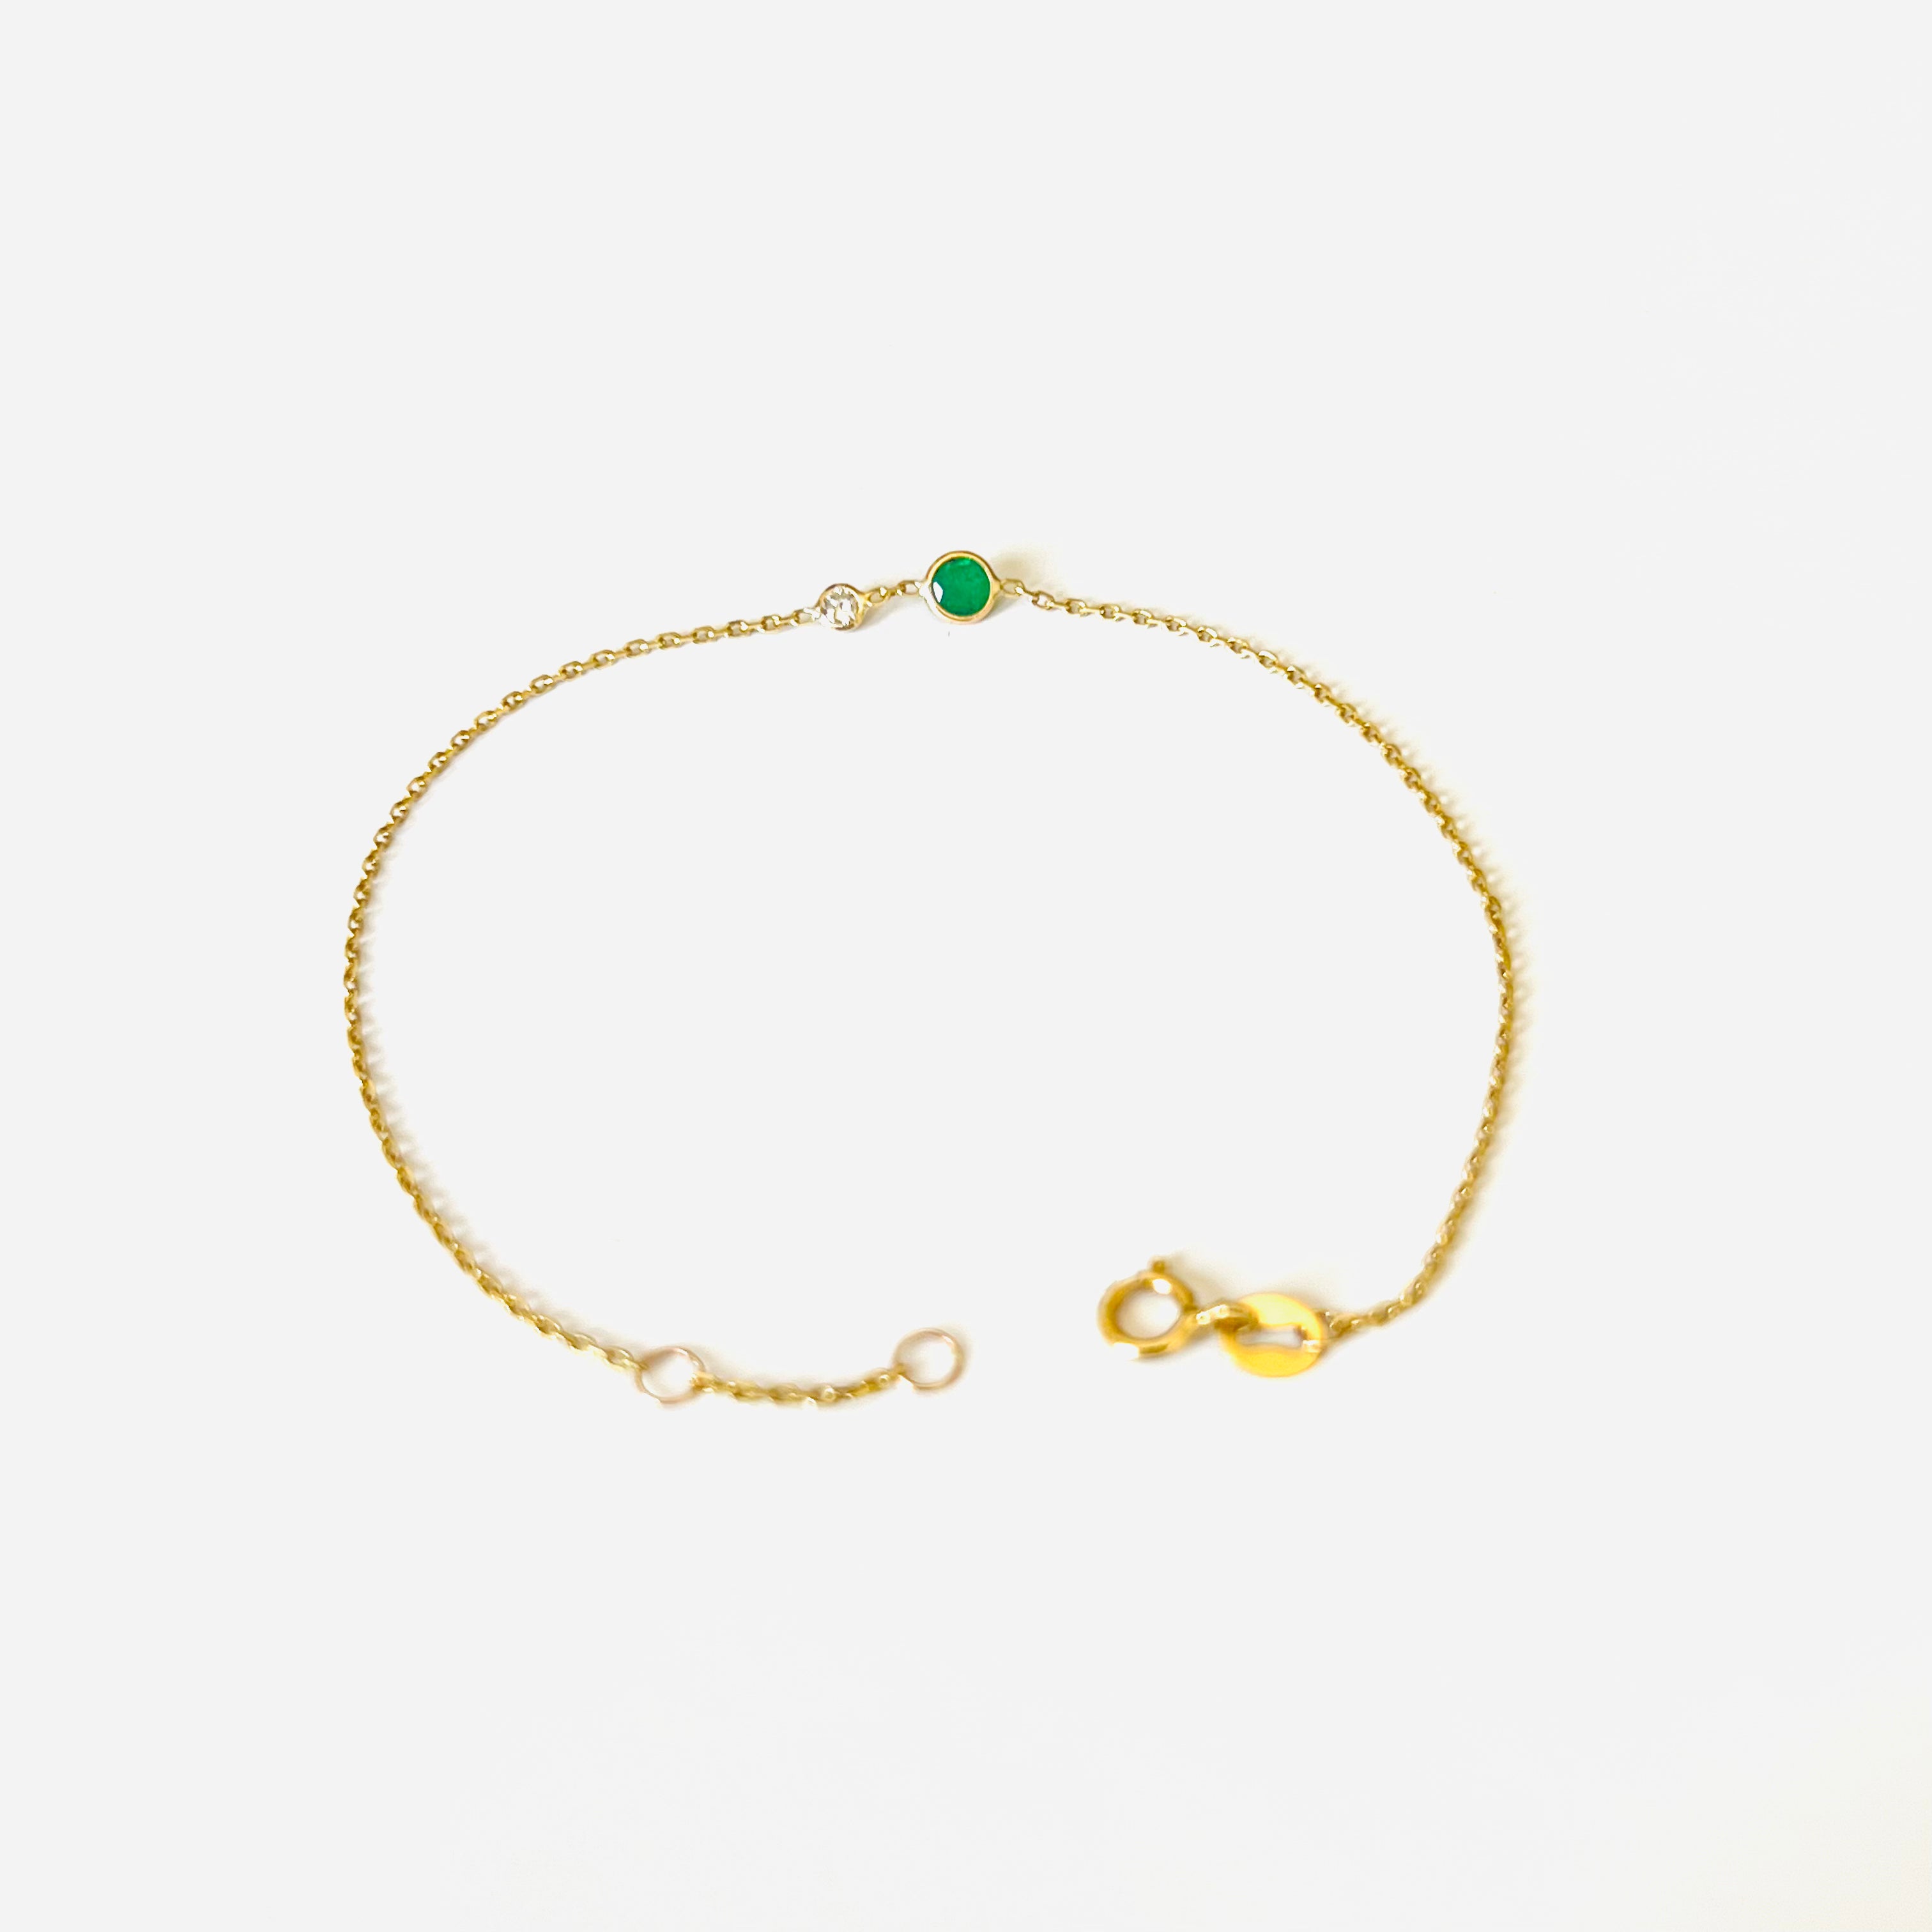 Emerald And Diamond Bracelet in Solid 14k Yellow Gold 6.75"